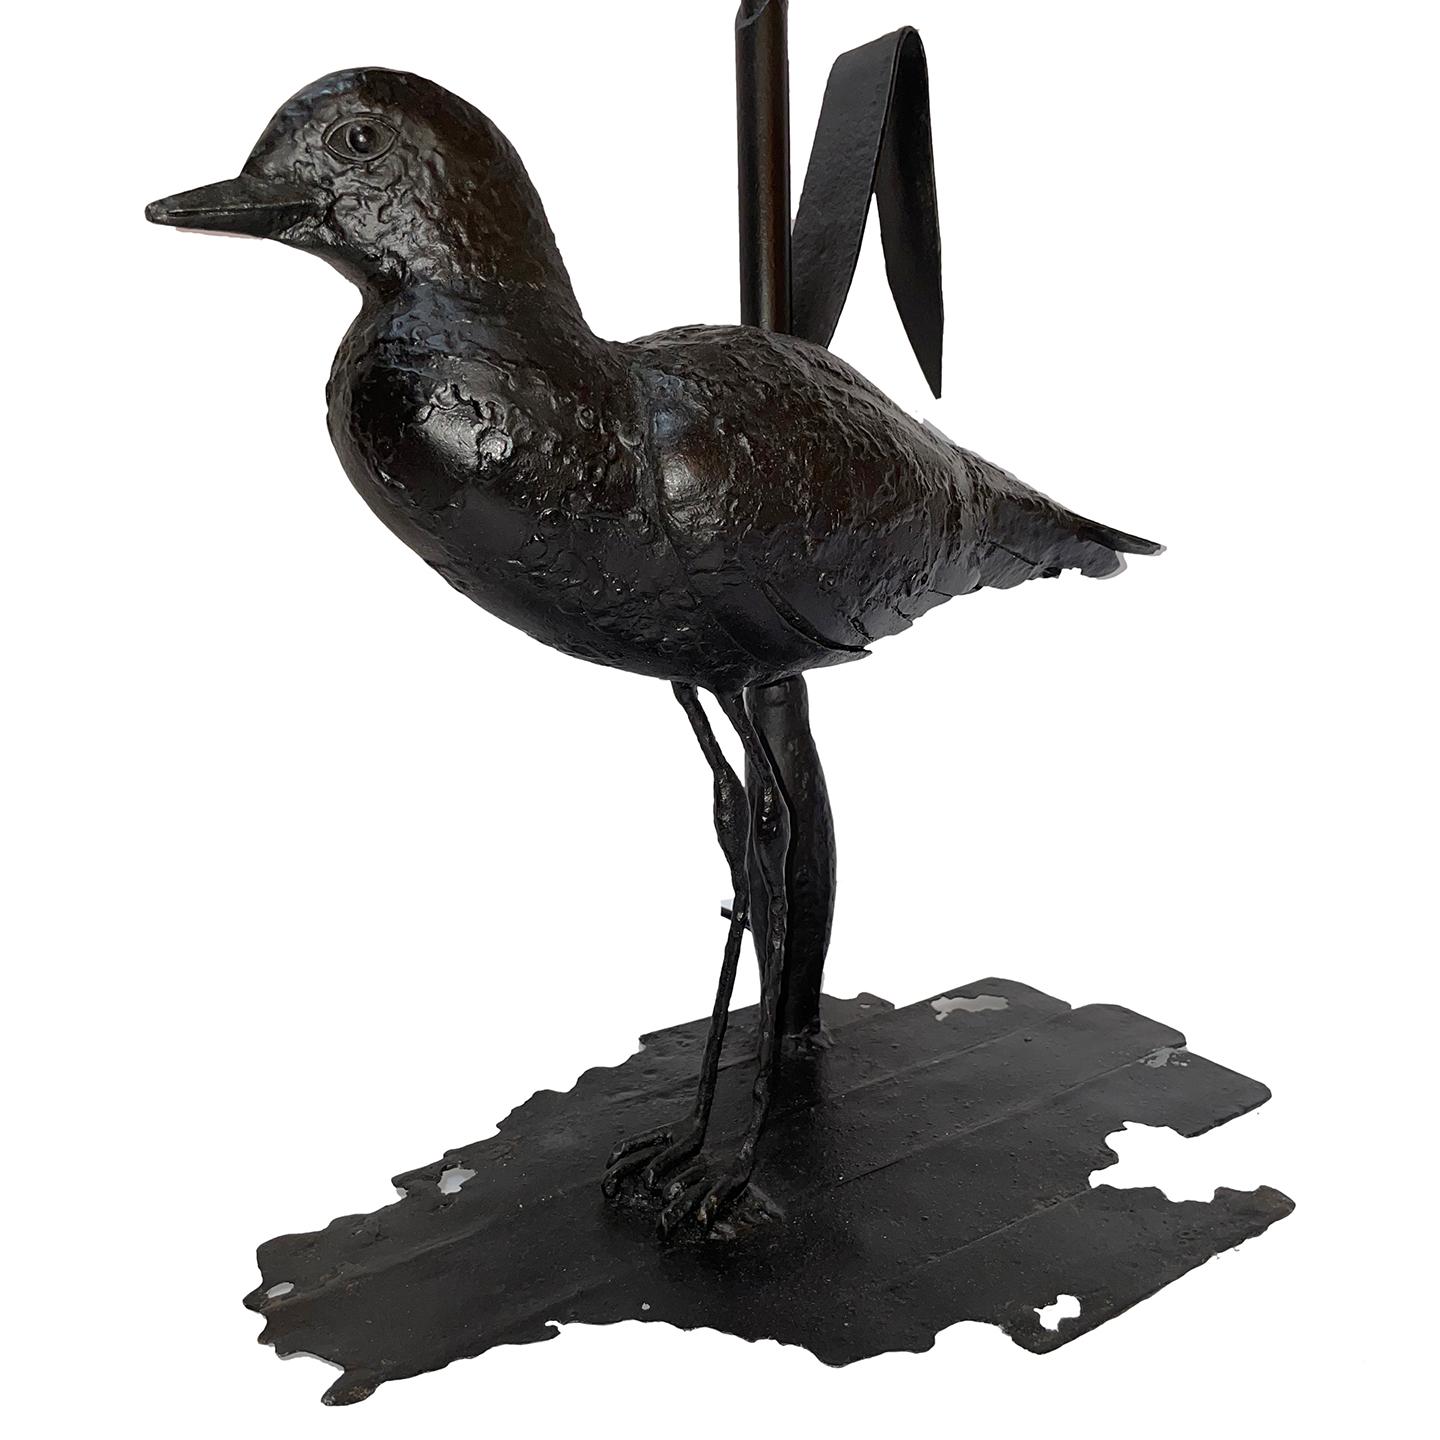 Circa 1950's French Hammered wrought iron table lamps in the form of birds.
Measurements:
Height: 26.75